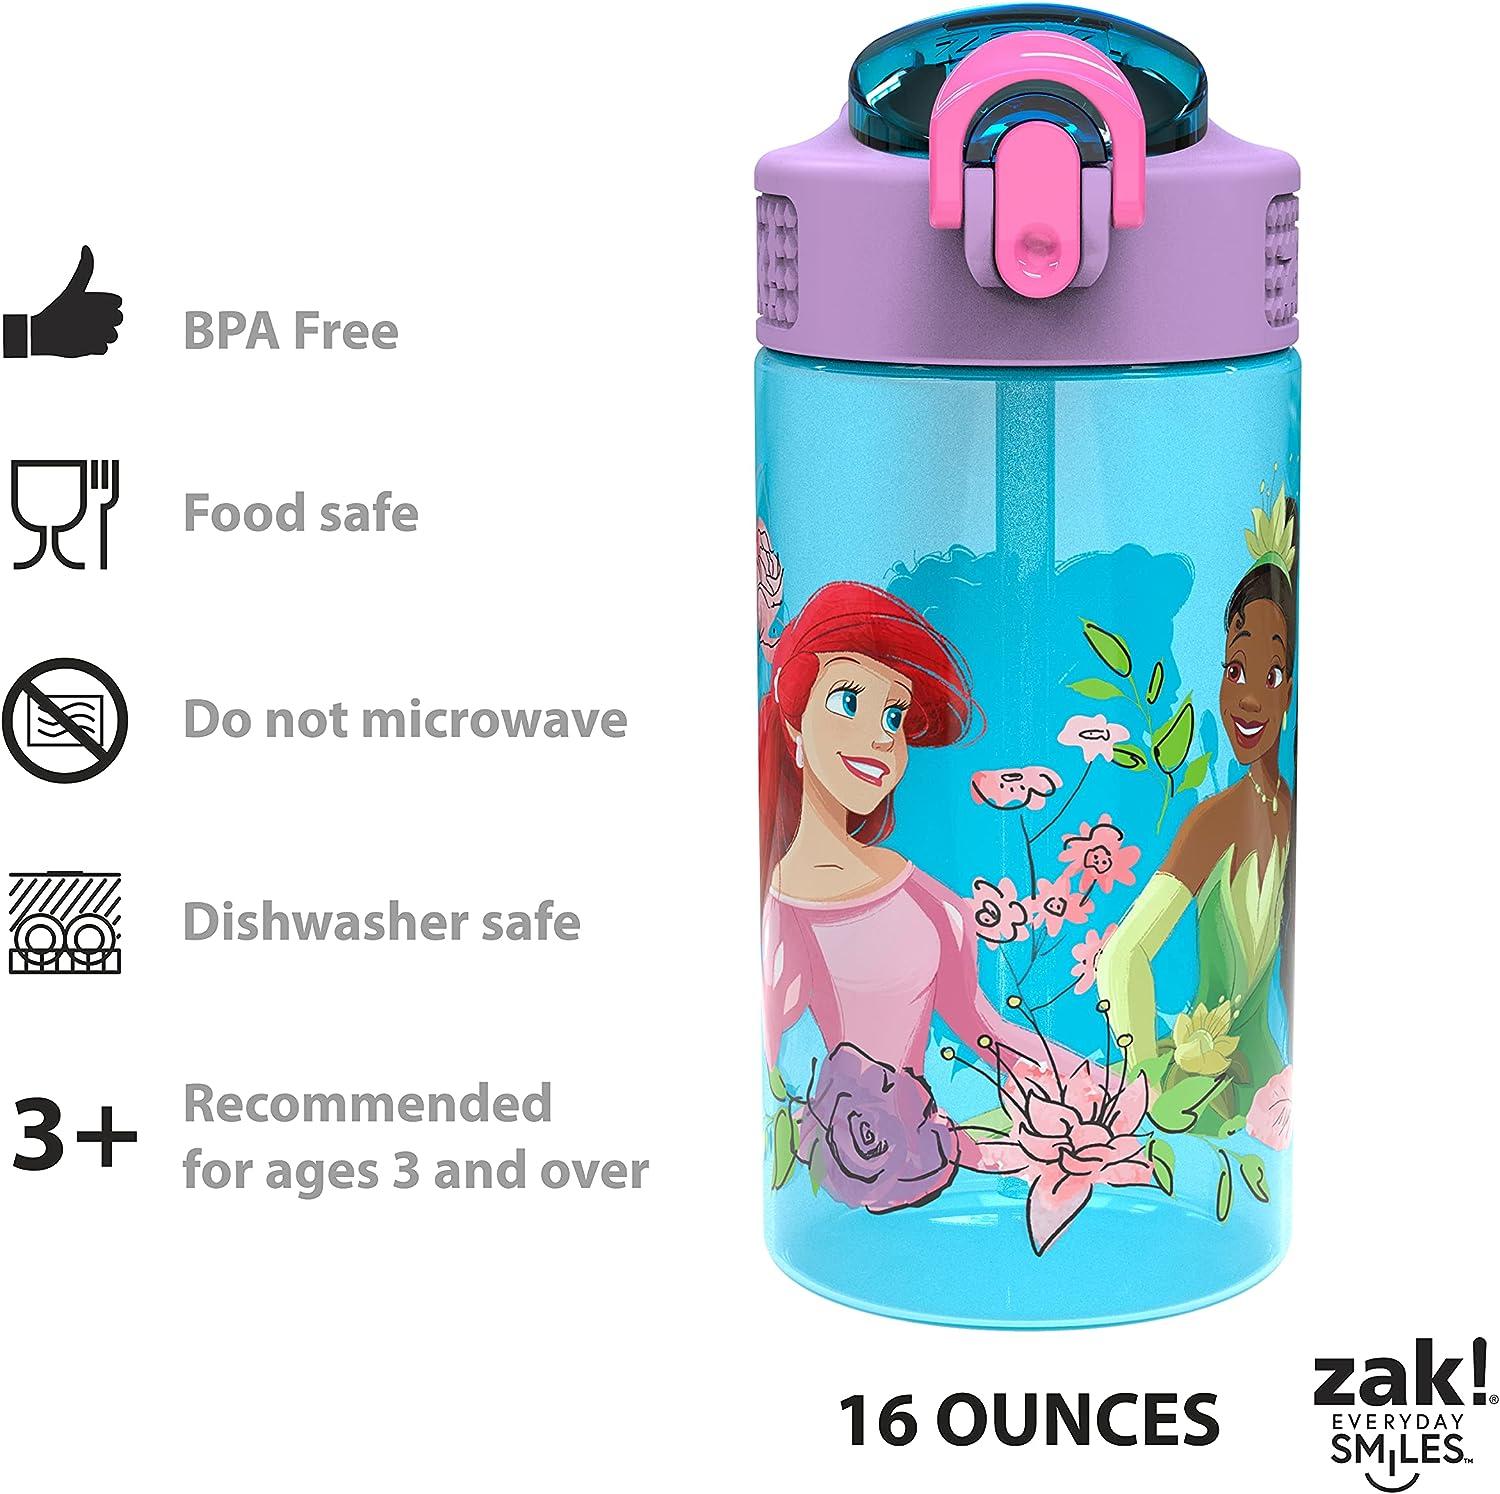 Zak Designs Kids Durable Plastic Spout Cover and Built-in Carrying Loop, Leak-Proof Water Design for Travel, 16oz, 2pc Set, Minecraft Bottle 2pk